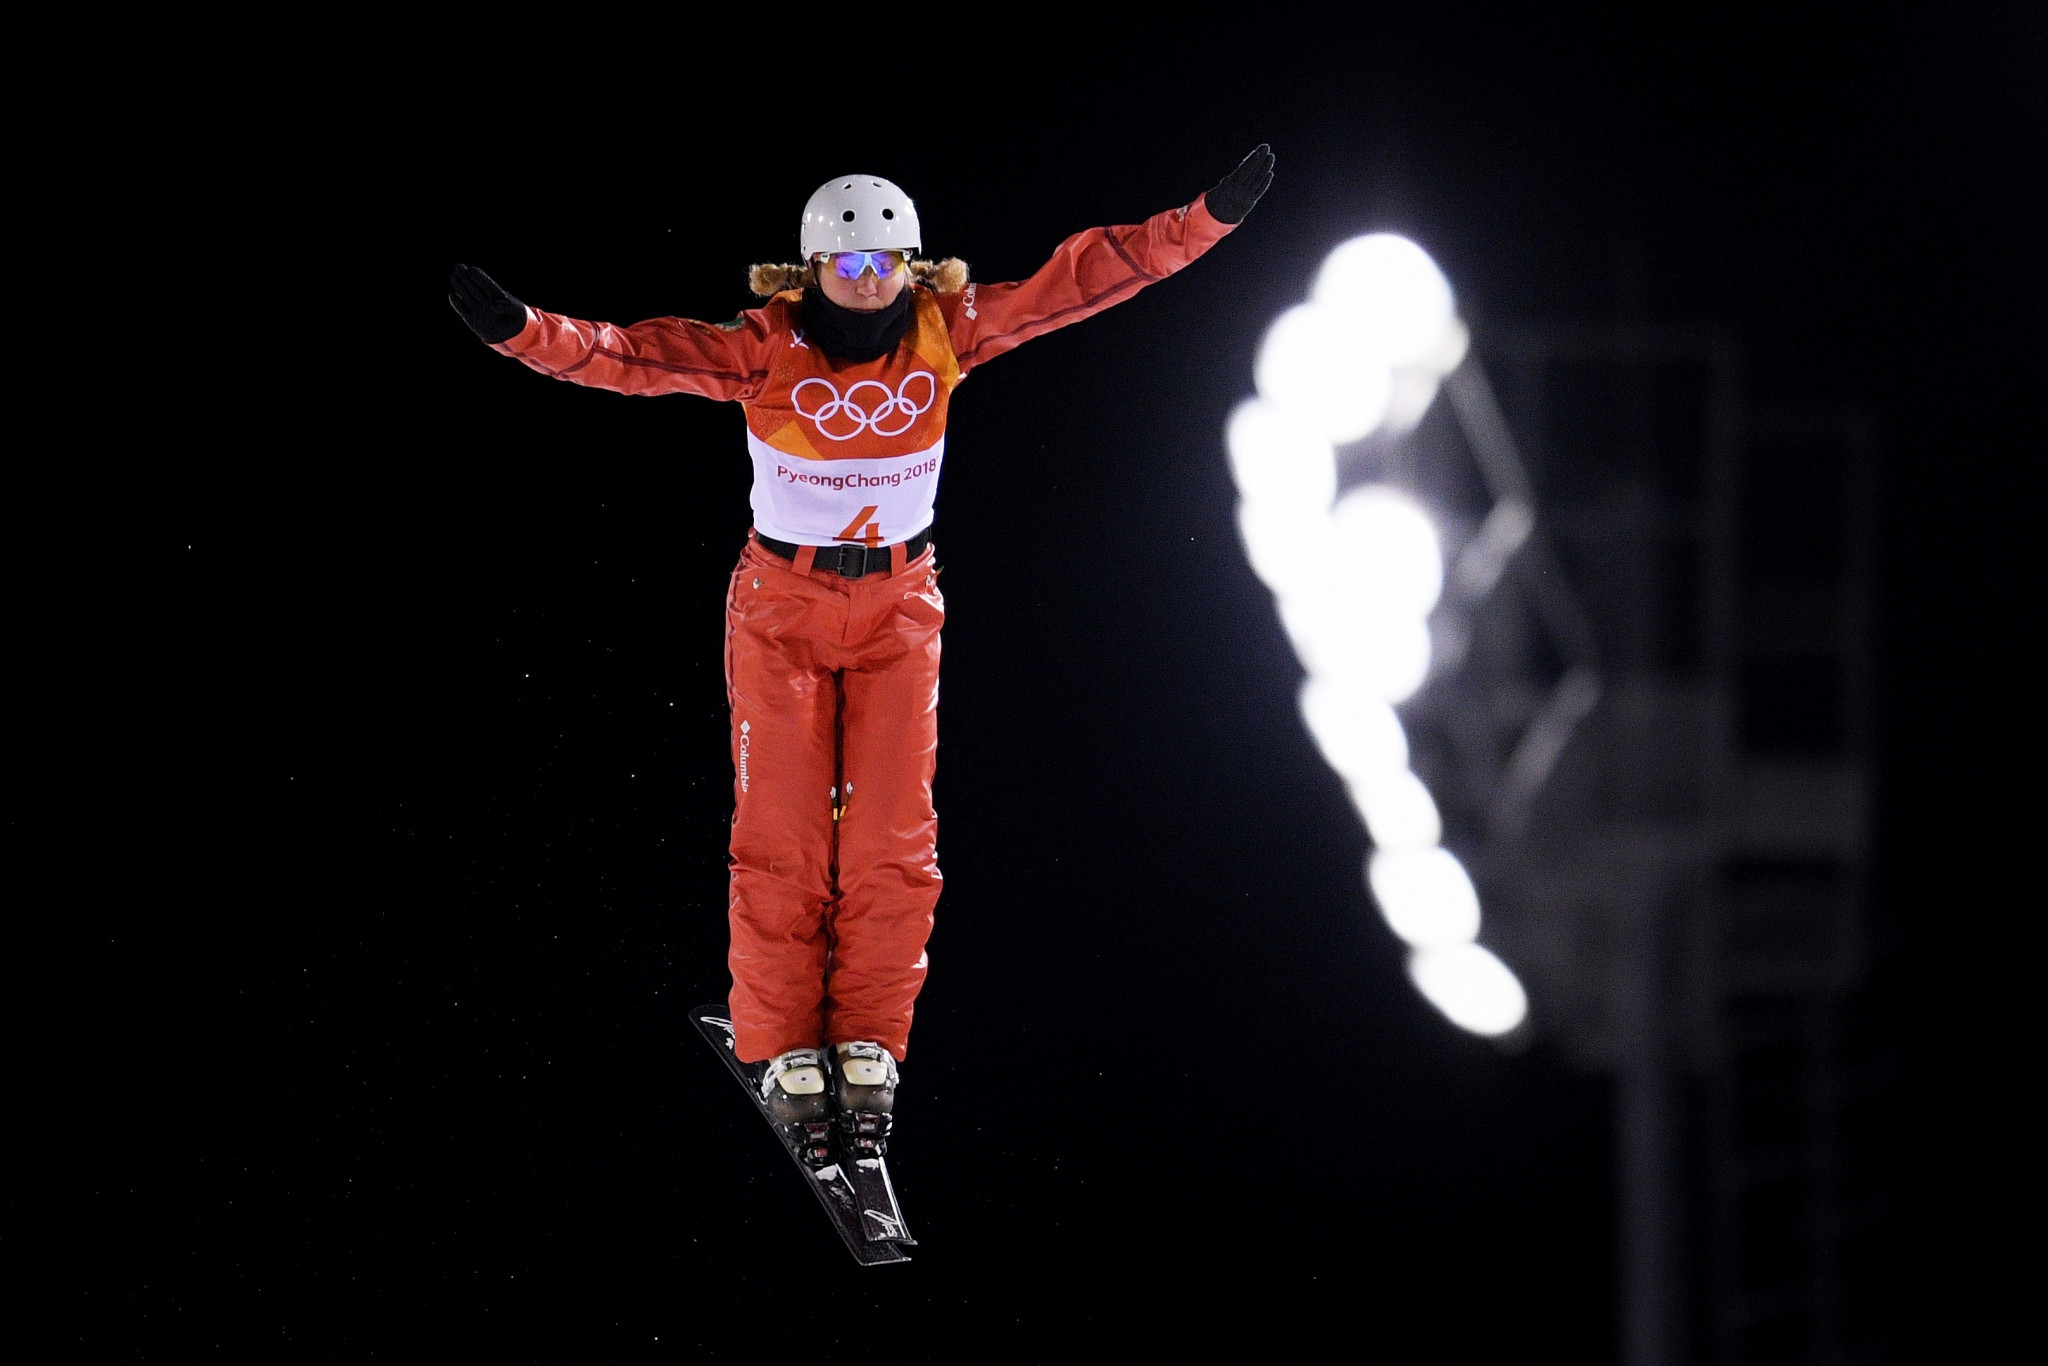 Former world freestyle skiing champion Aliaksandra Ramanouskaya was detained by police in November for for violating anti-protest laws ©Getty Images